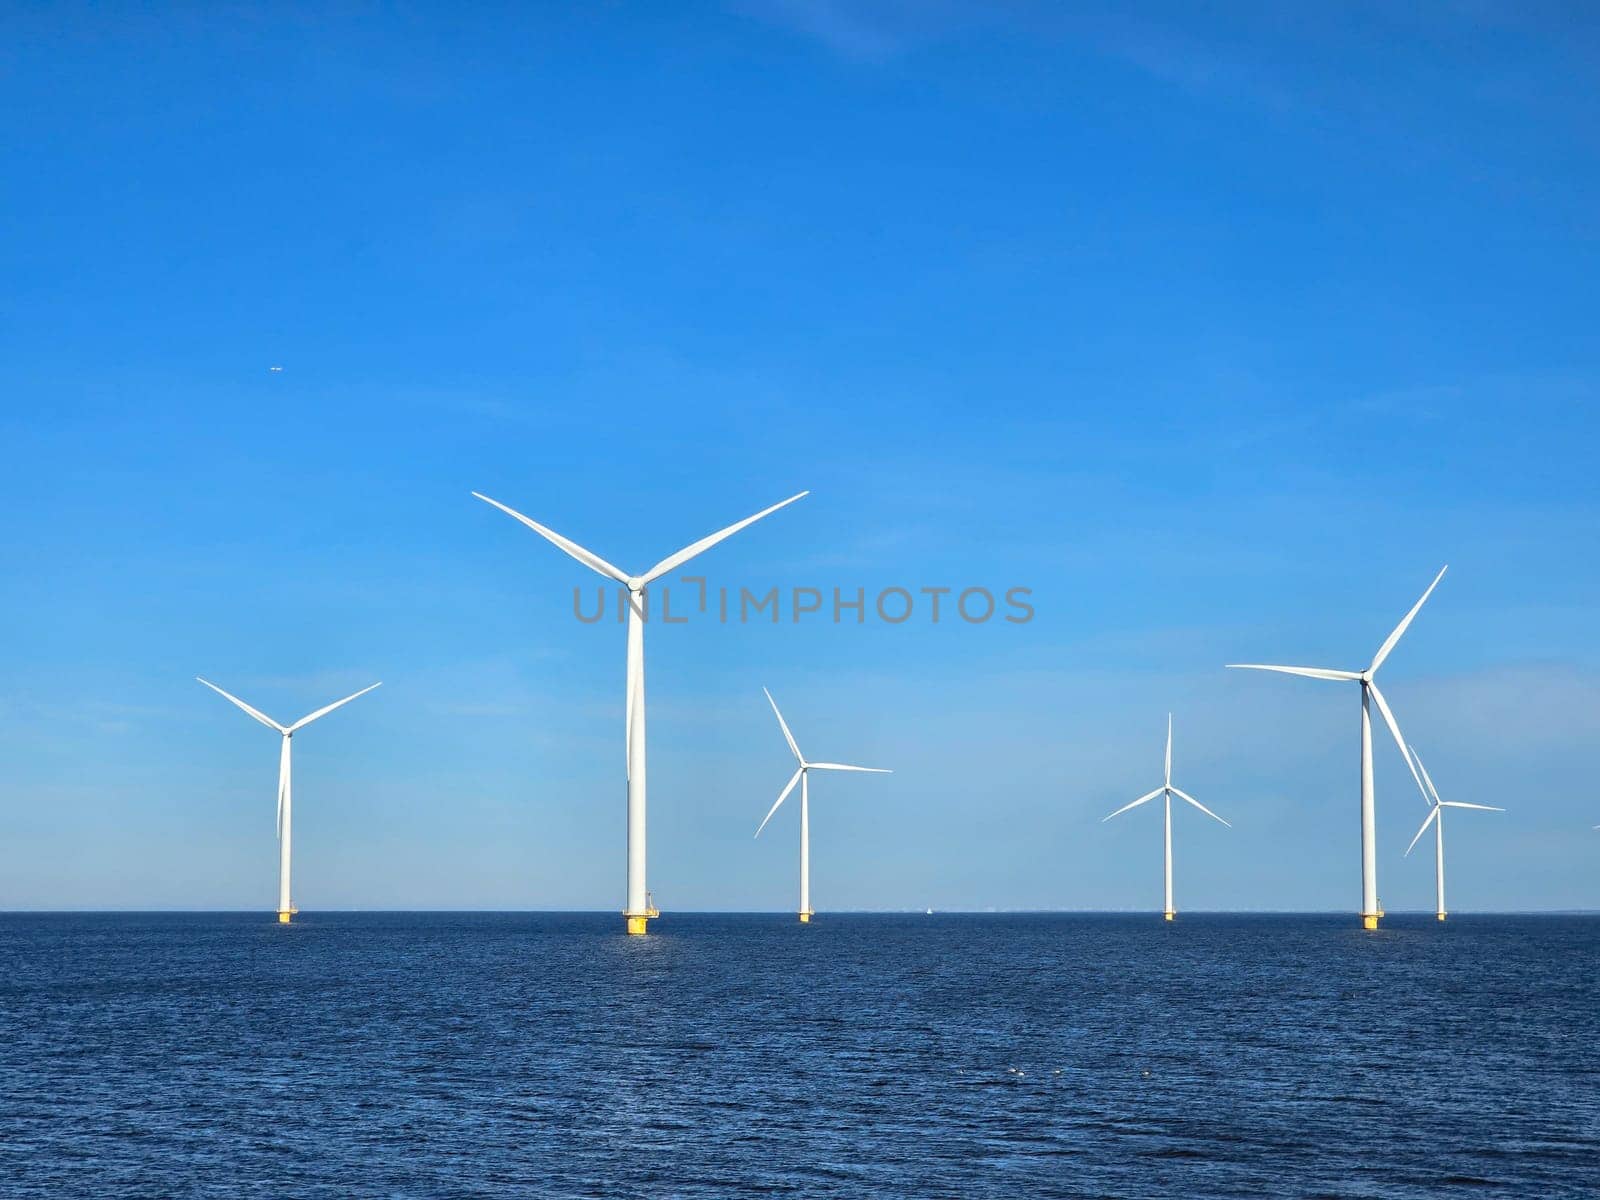 Windmill park in the ocean, view of windmill turbines on a Dutch dike generating green energy electrically, windmills isolated at sea in the Netherlands with a blue sky on a sunny day